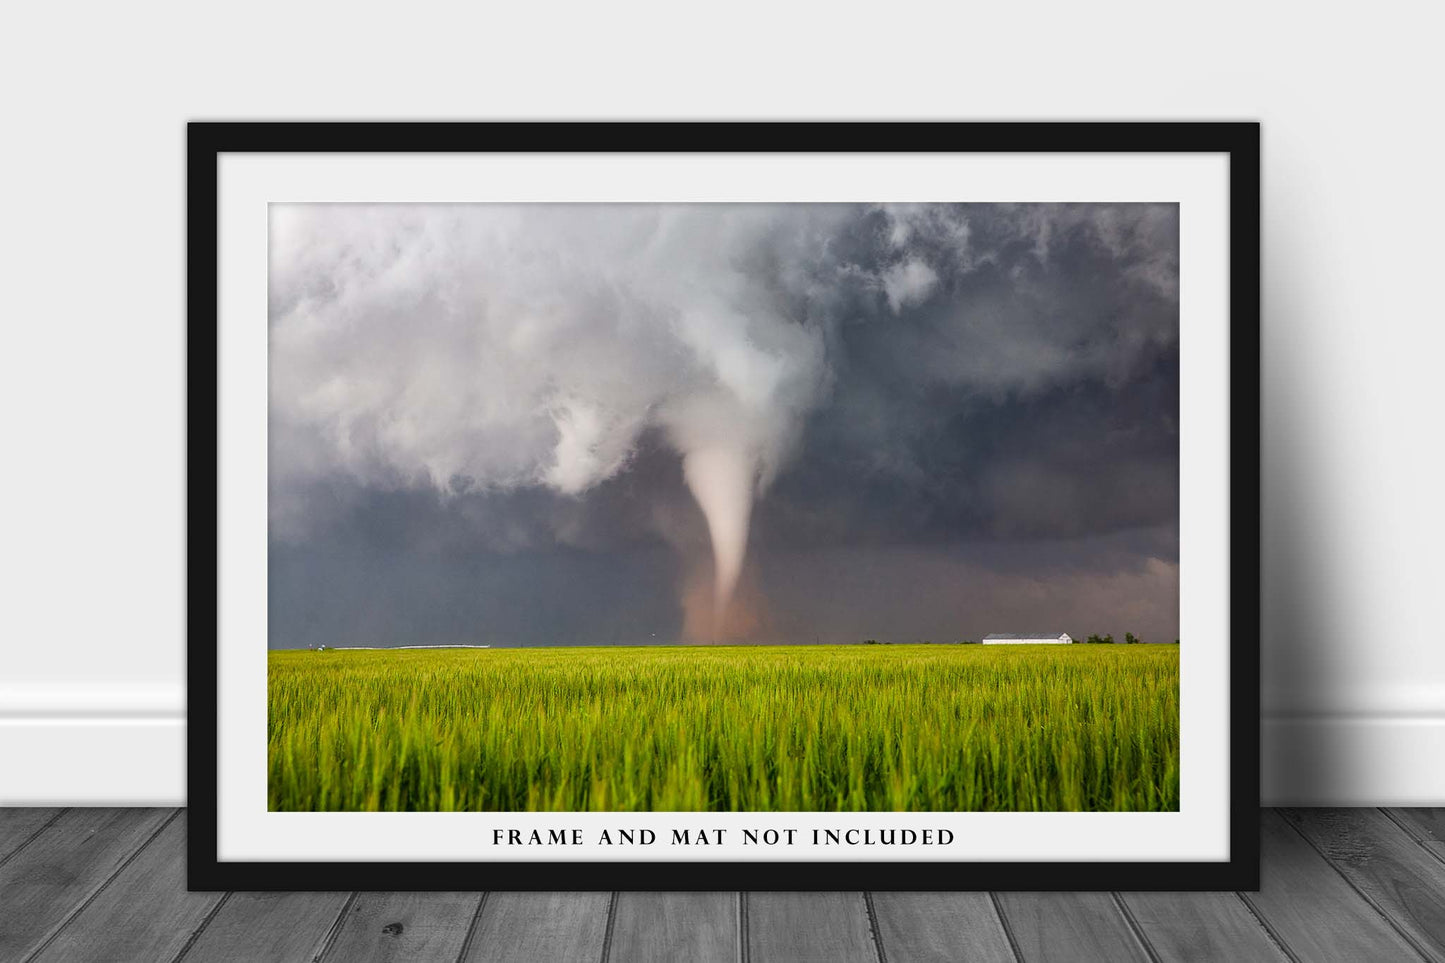 Storm Photography Print - Picture of Tornado Spinning Up Dust Over Wheat Field on Spring Day in Texas - Weather Thunderstorm Wall Art Decor